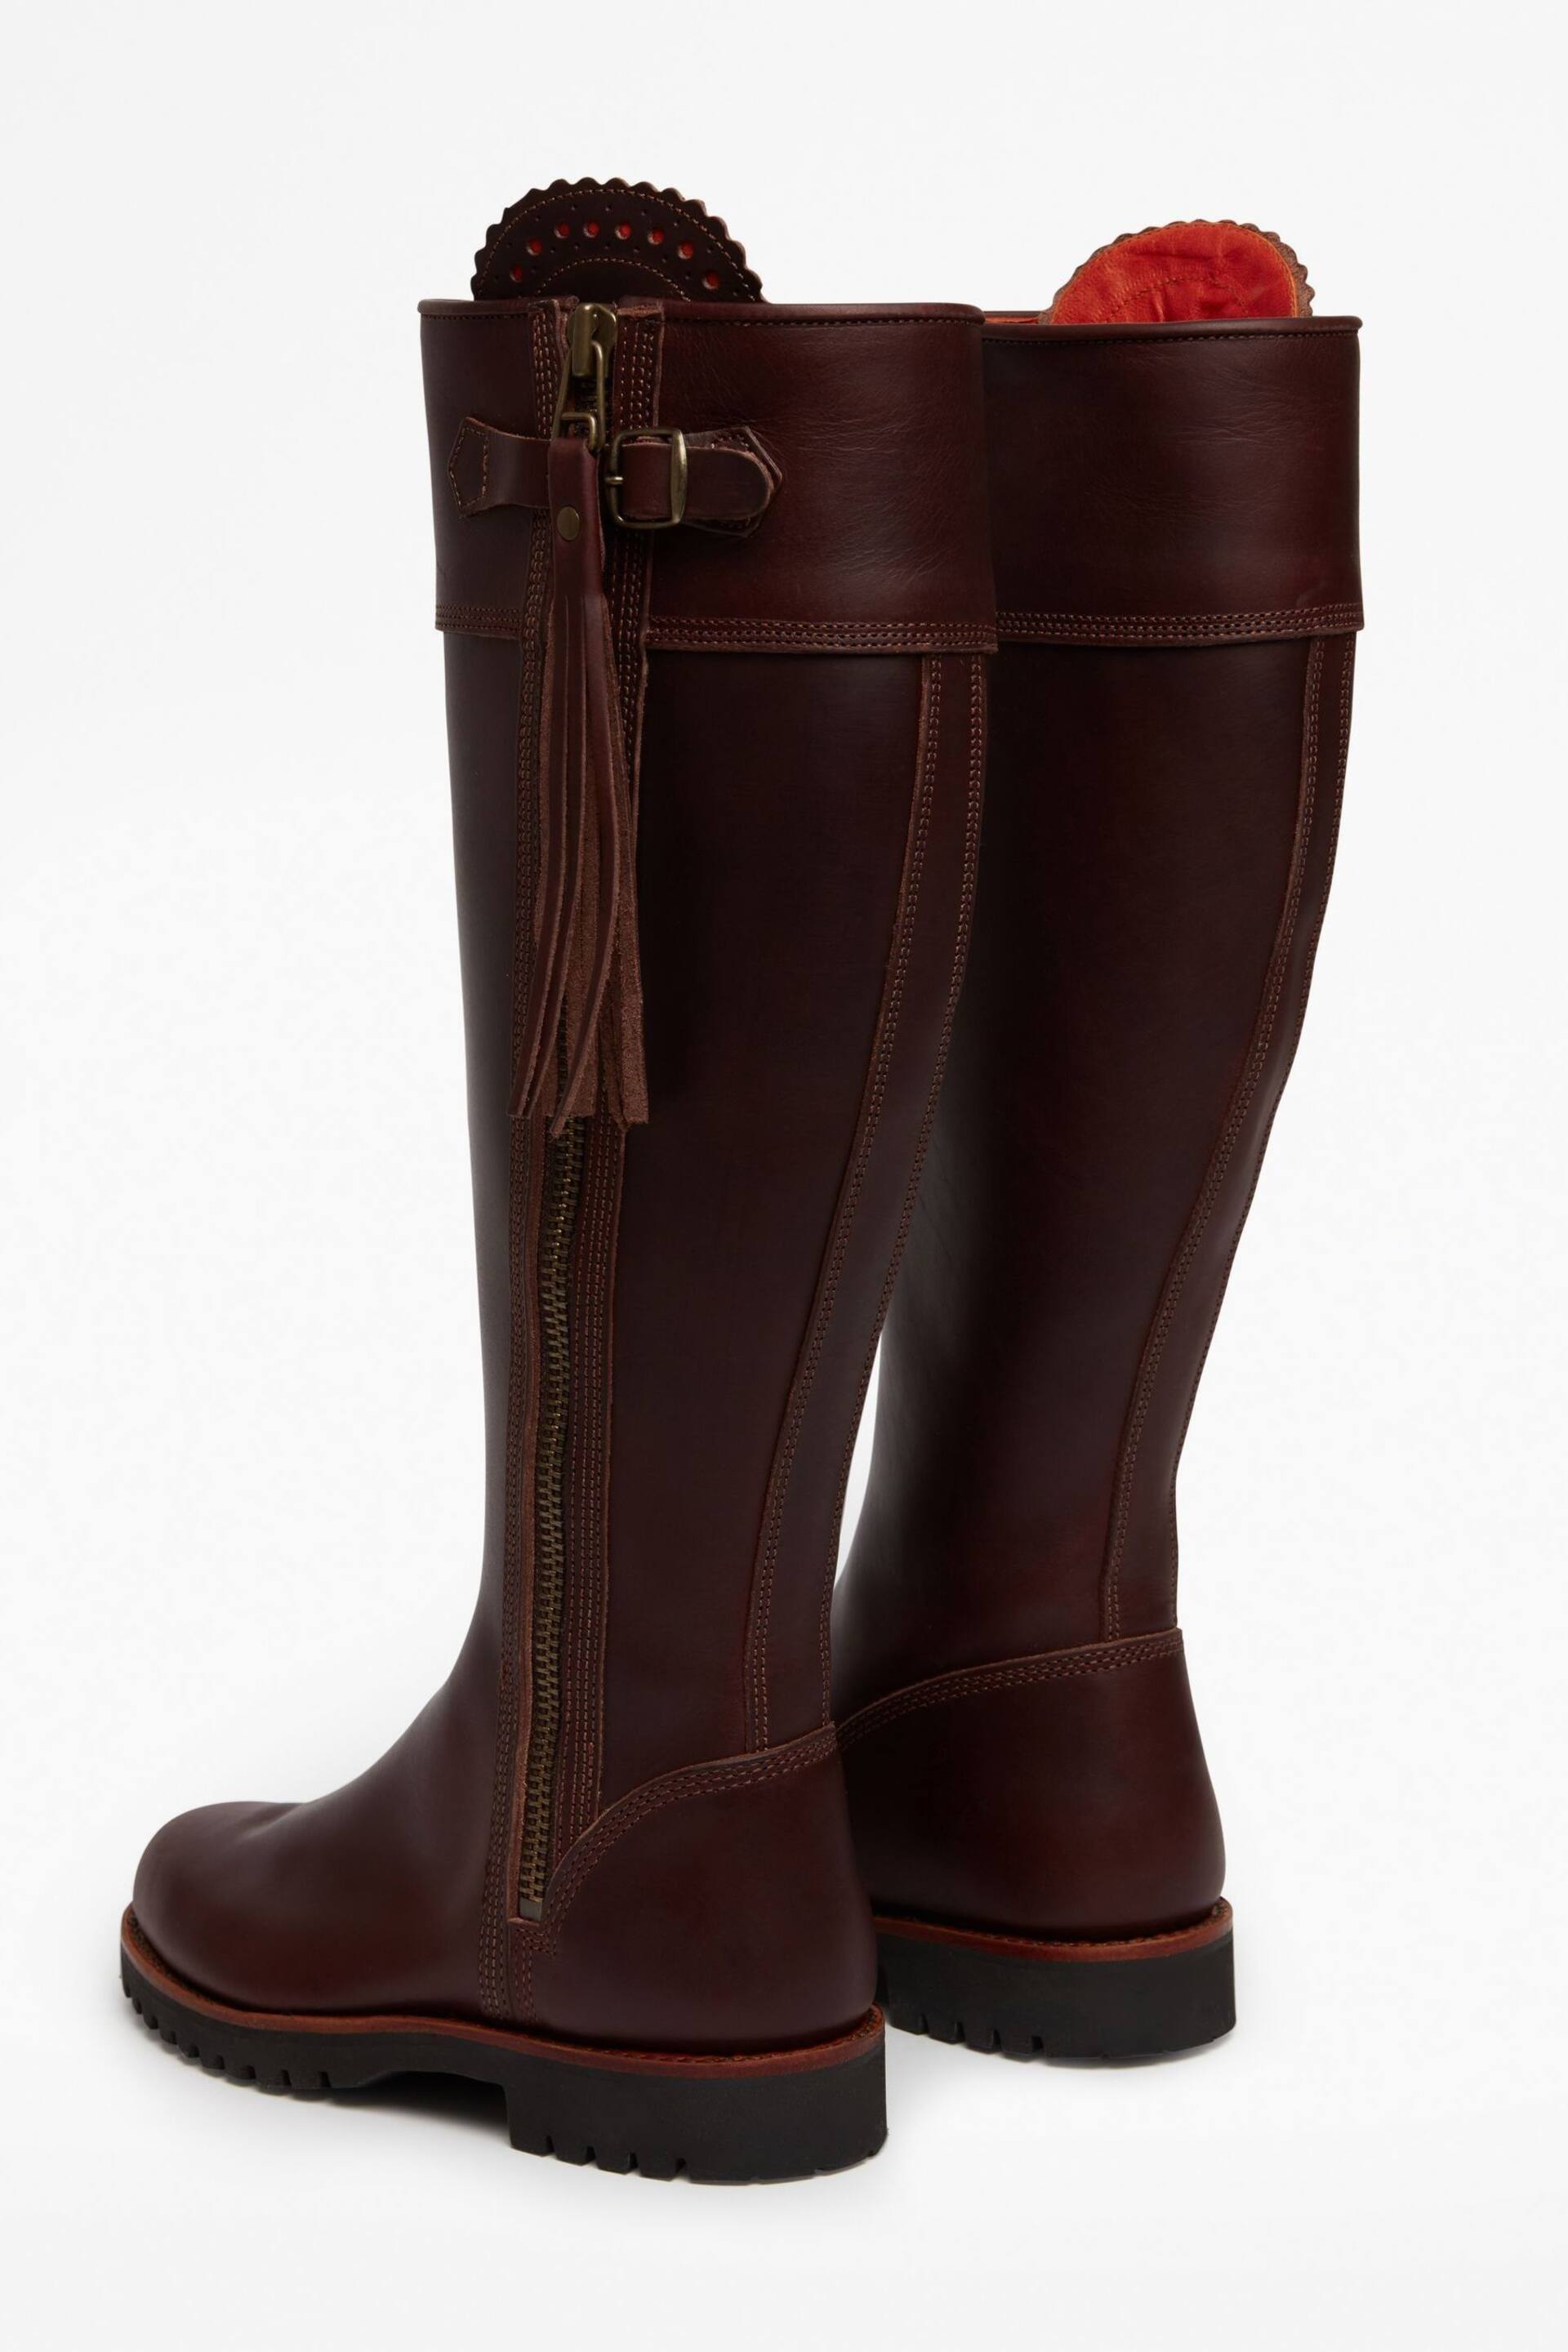 Penelope Chilvers Long Tassel Boots - Image 3 of 5